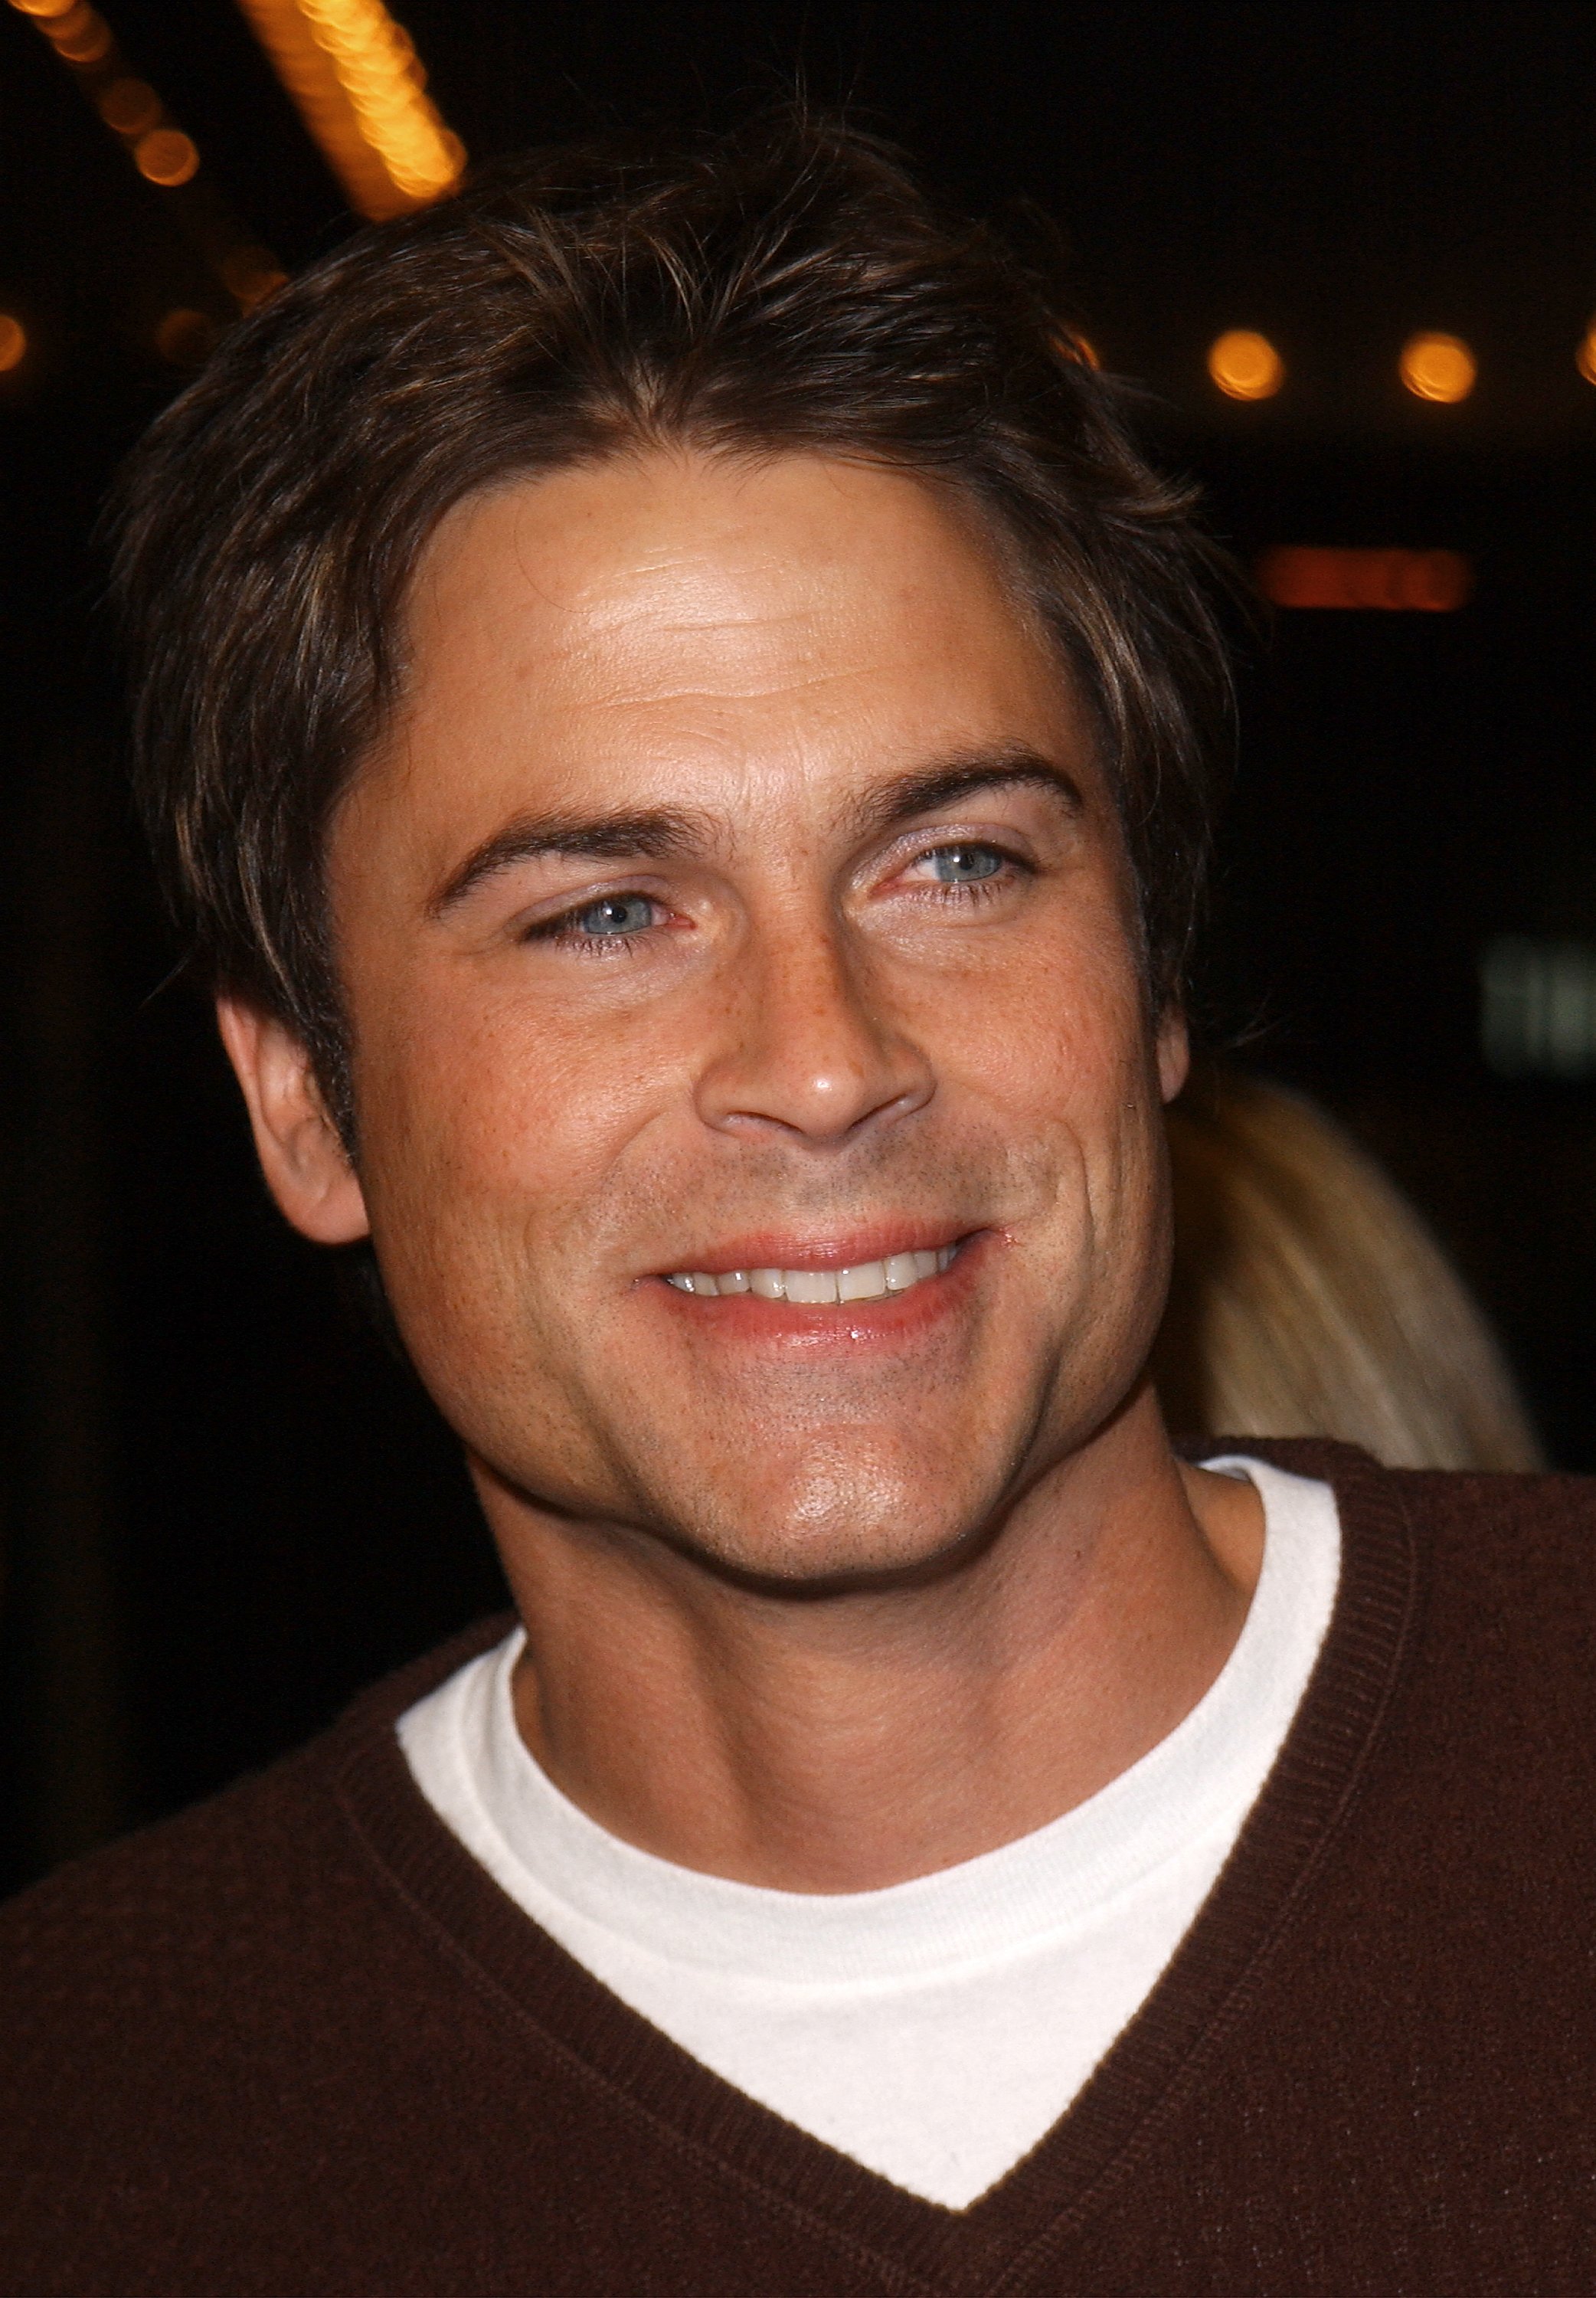 Rob Lowe at the premiere of the film, "The Affair of the Necklace" on November 20, 2001 in Los Angeles, California | Source: Getty Images